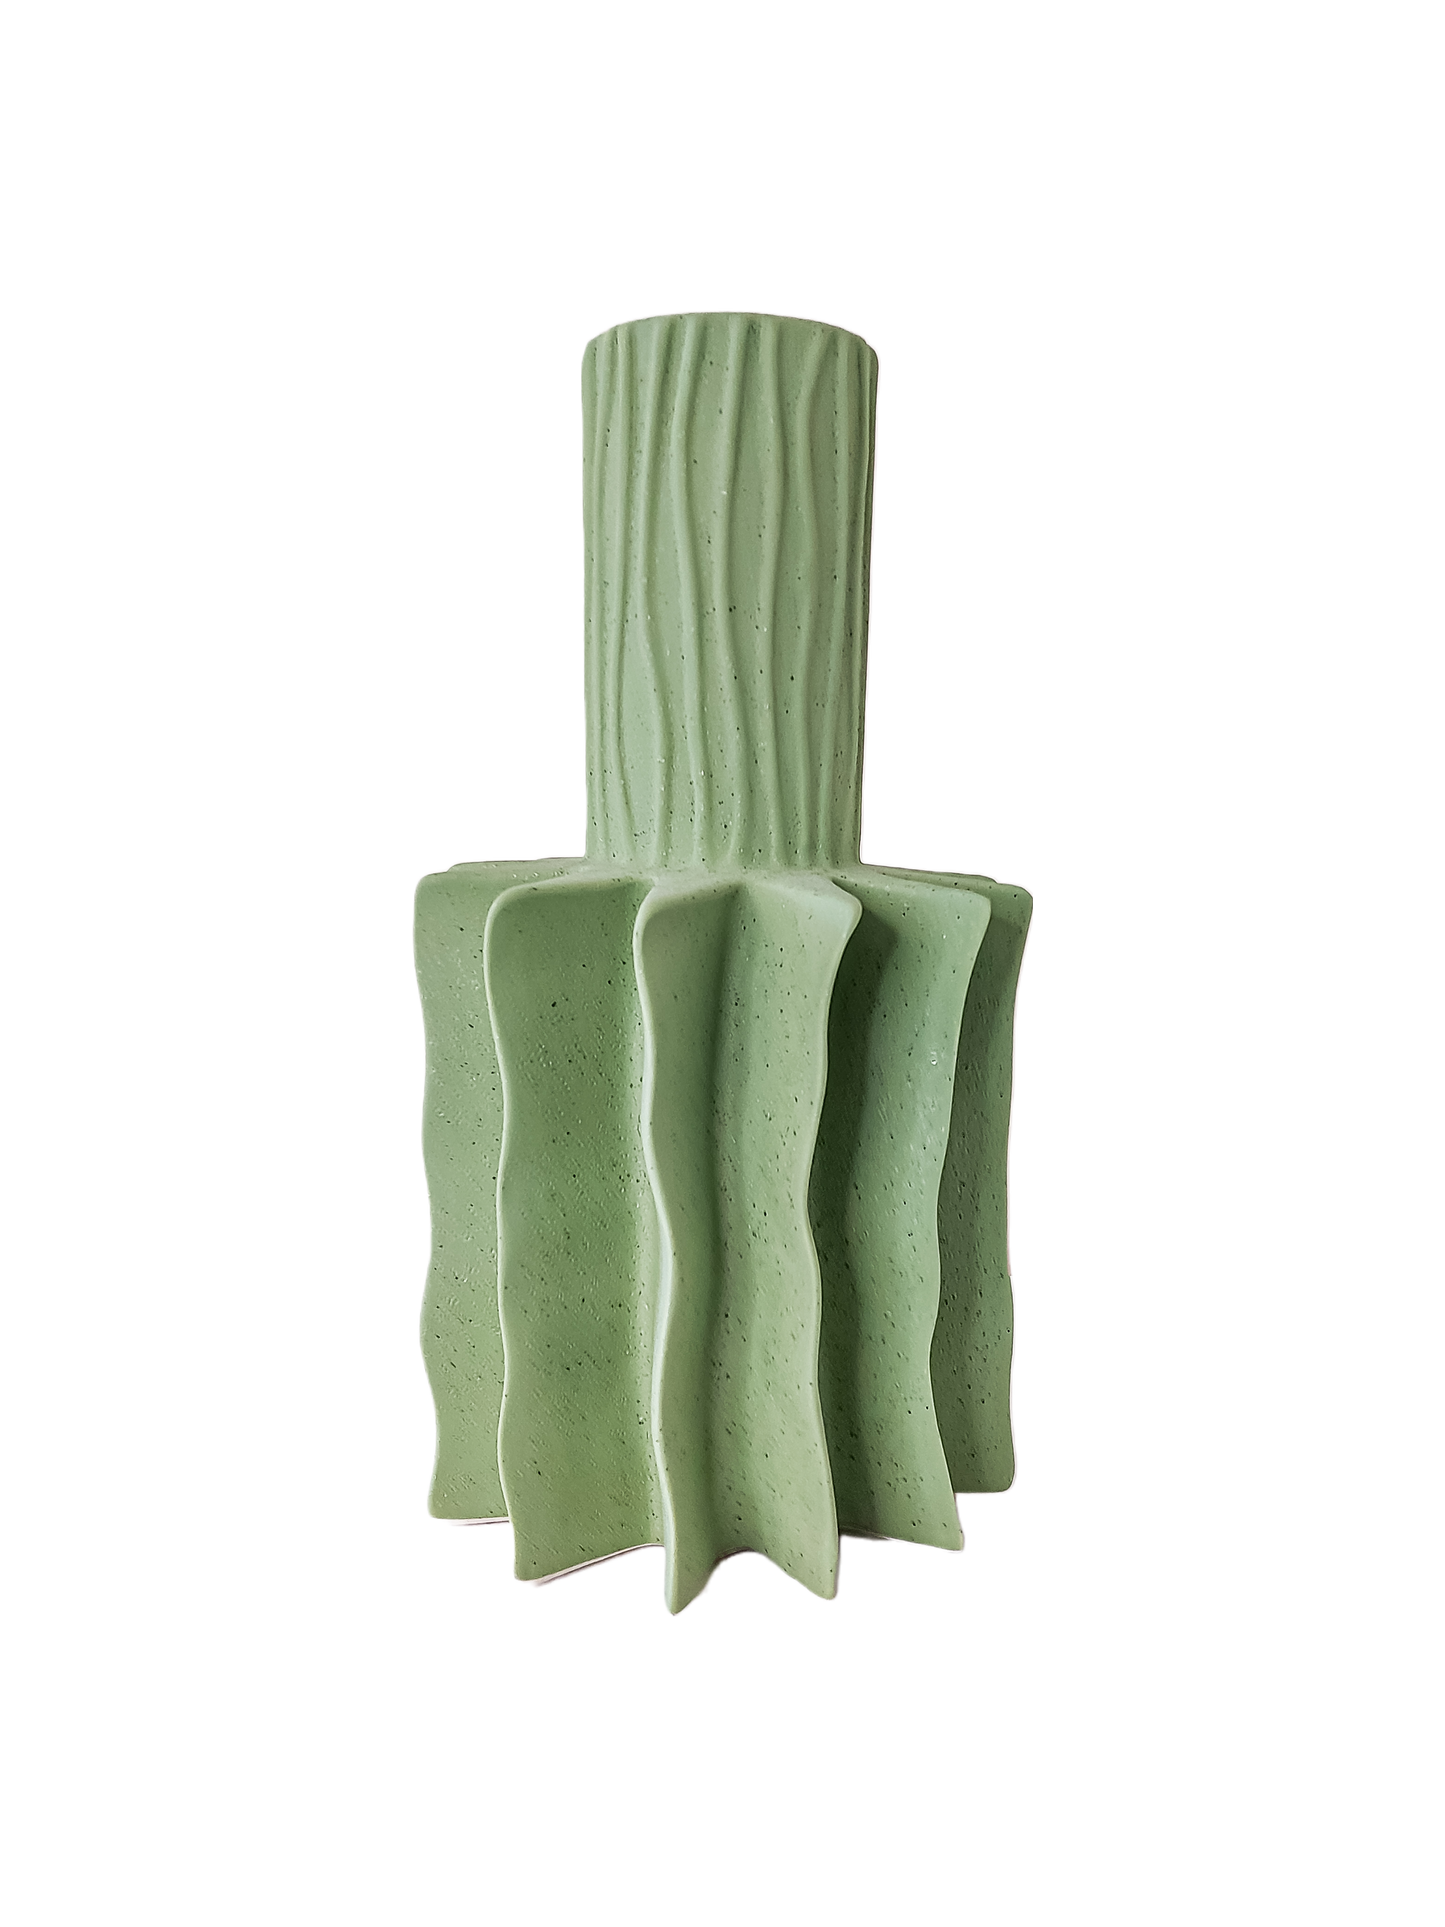 Canary Palm Ceramic Vase in Green